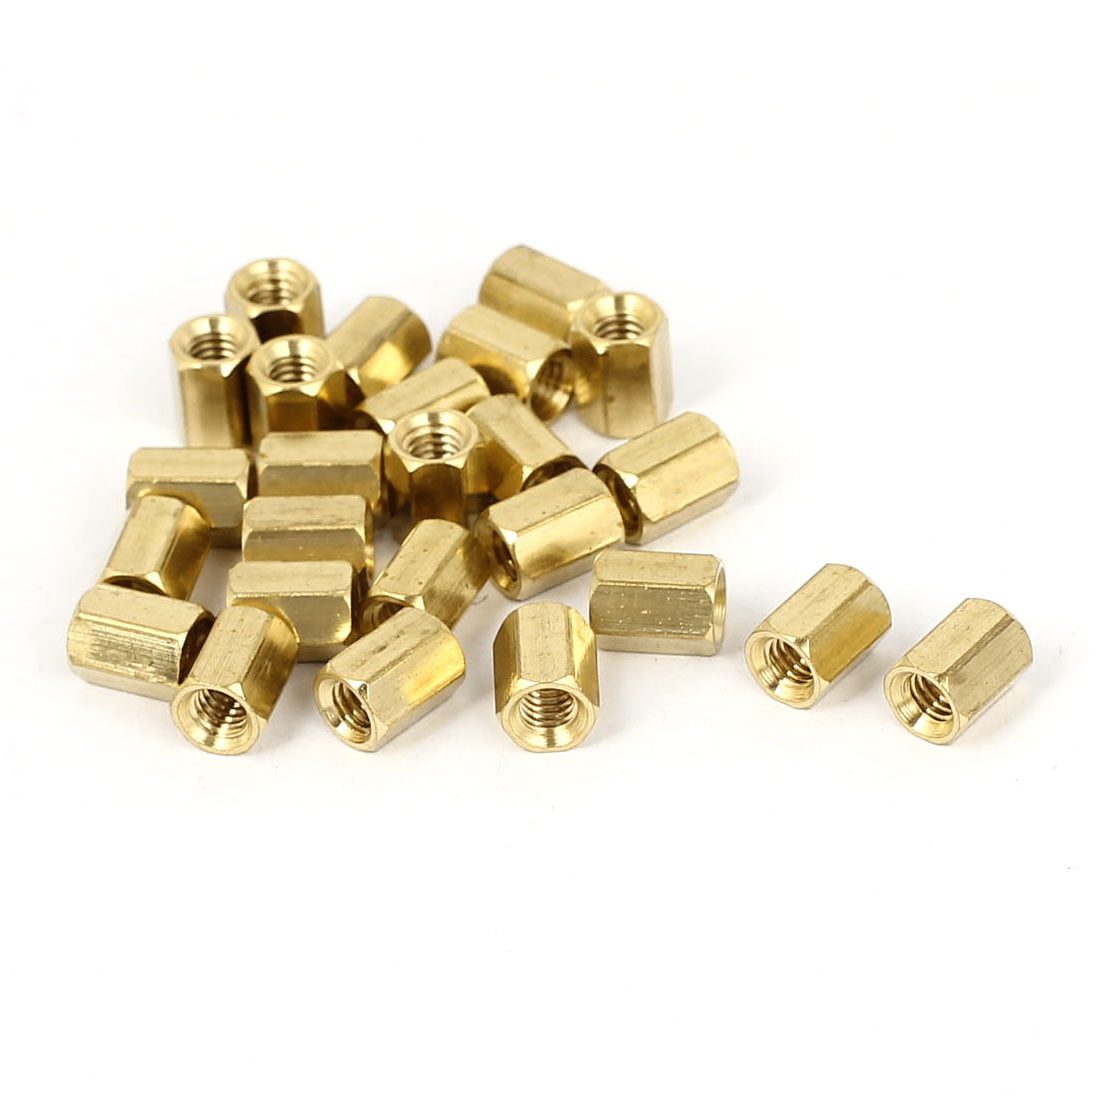 10PCS M4x40mm Female Hexagon Brass Standoff Spacer Nut Screw For PCB Mounting 